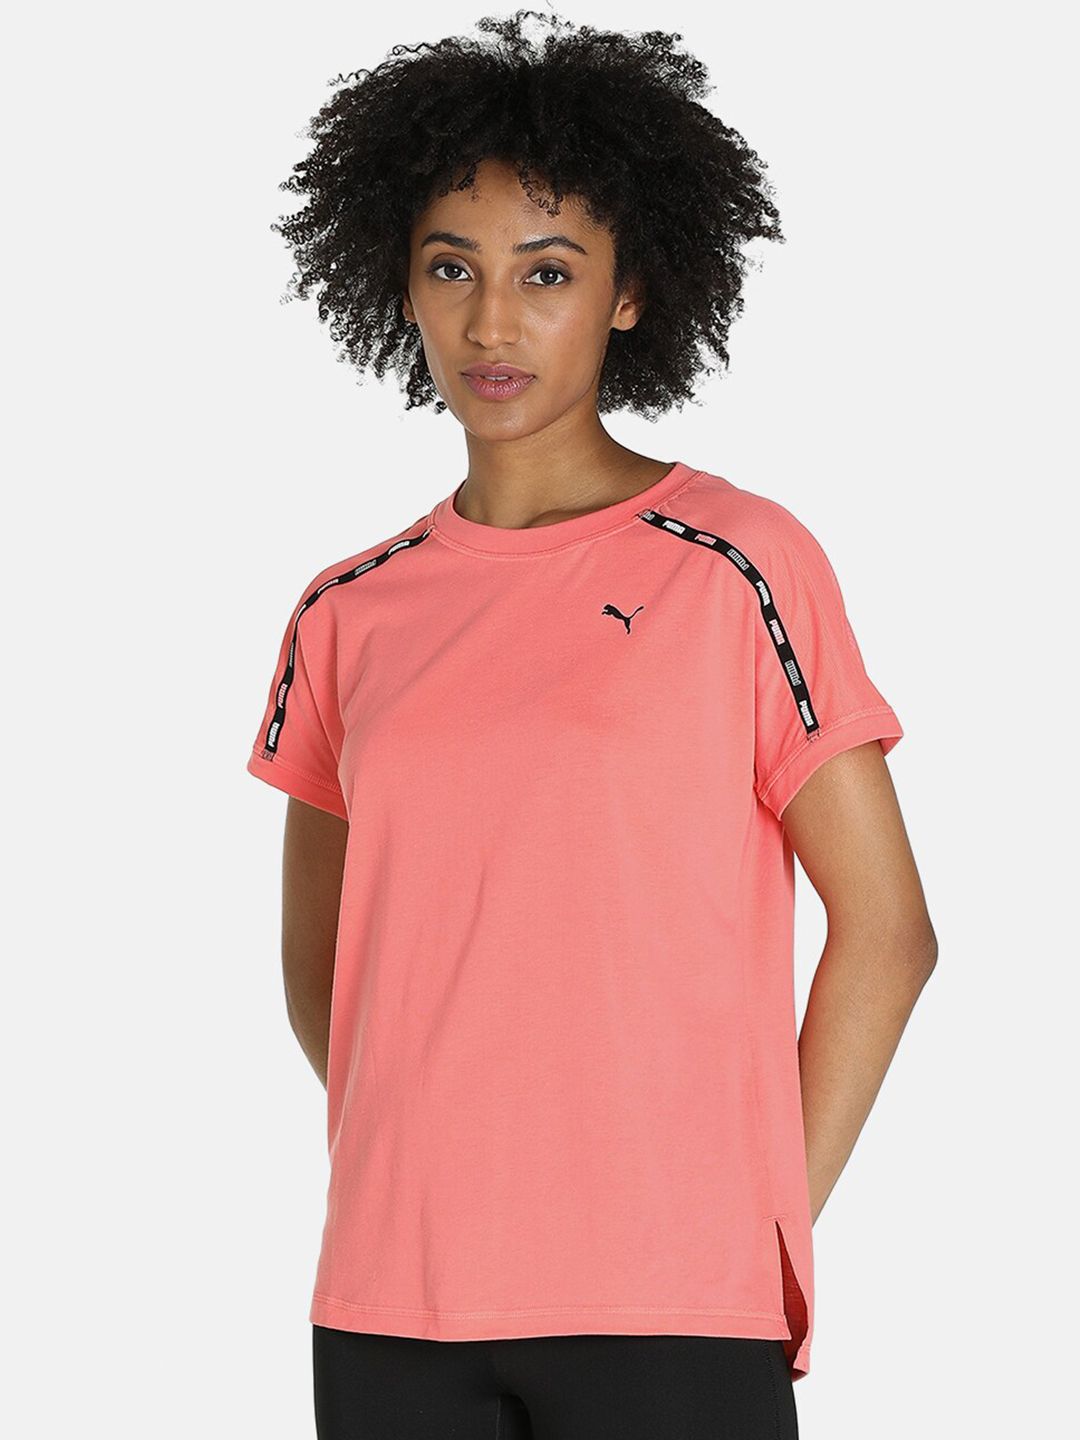 Puma Women Peach-Coloured Brand Logo Printed Relaxed Fit Training or Gym T-shirt Price in India